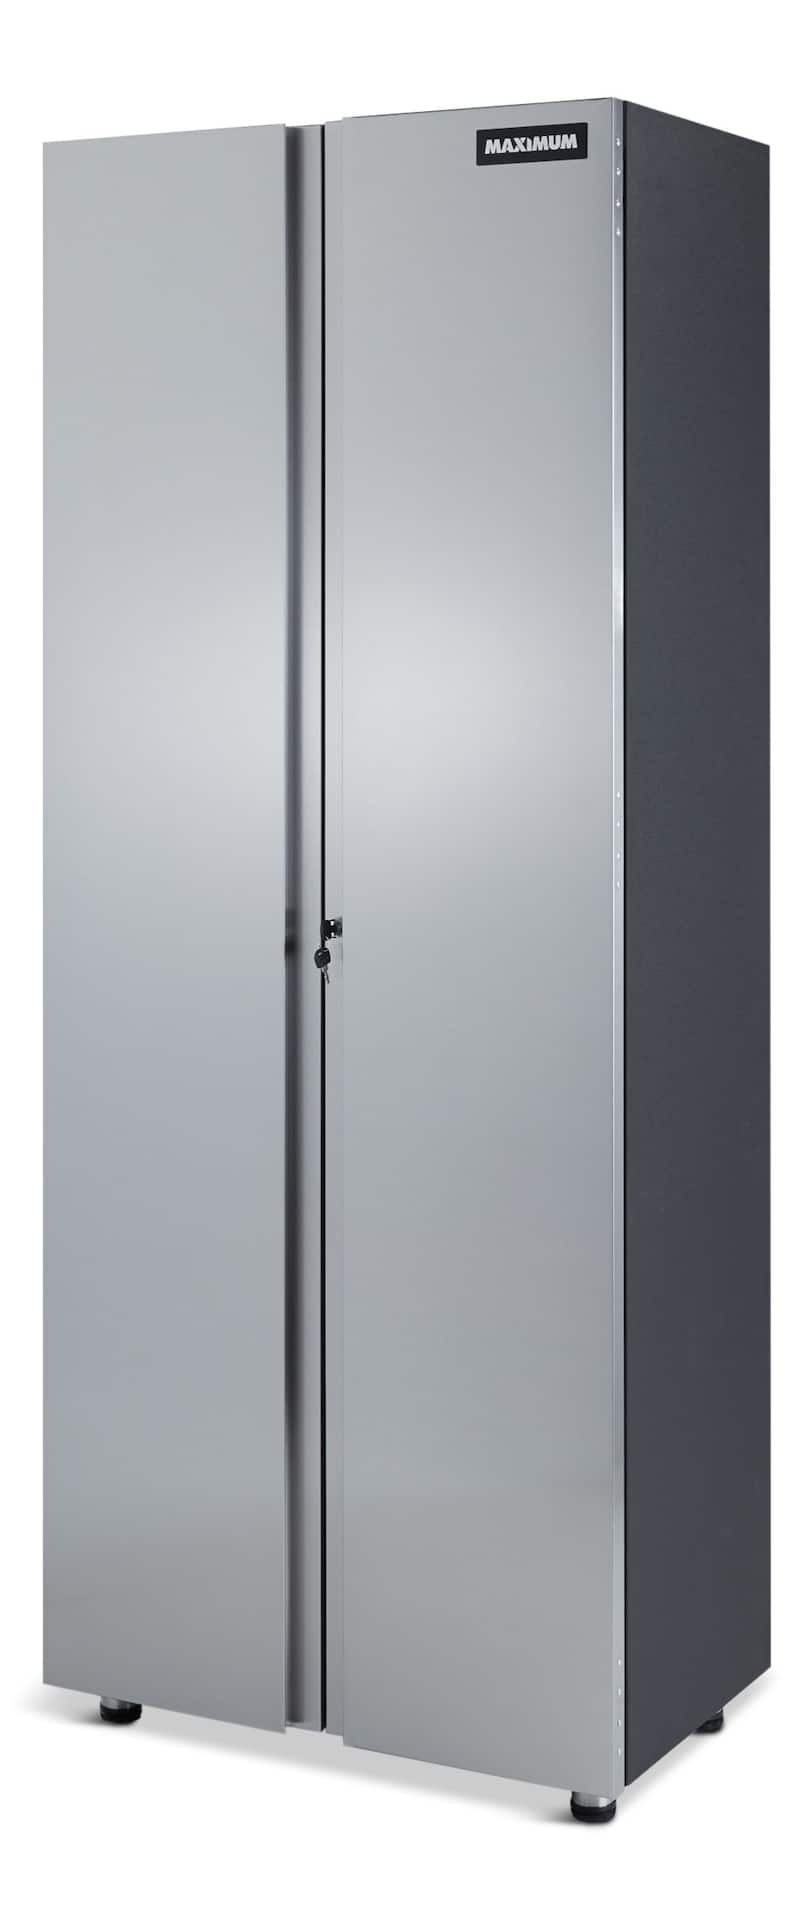 MAXIMUM 2-Door Tall Cabinet with 3 Adjustable Shelves, Stainless Series, 77  x 30 x 18-in